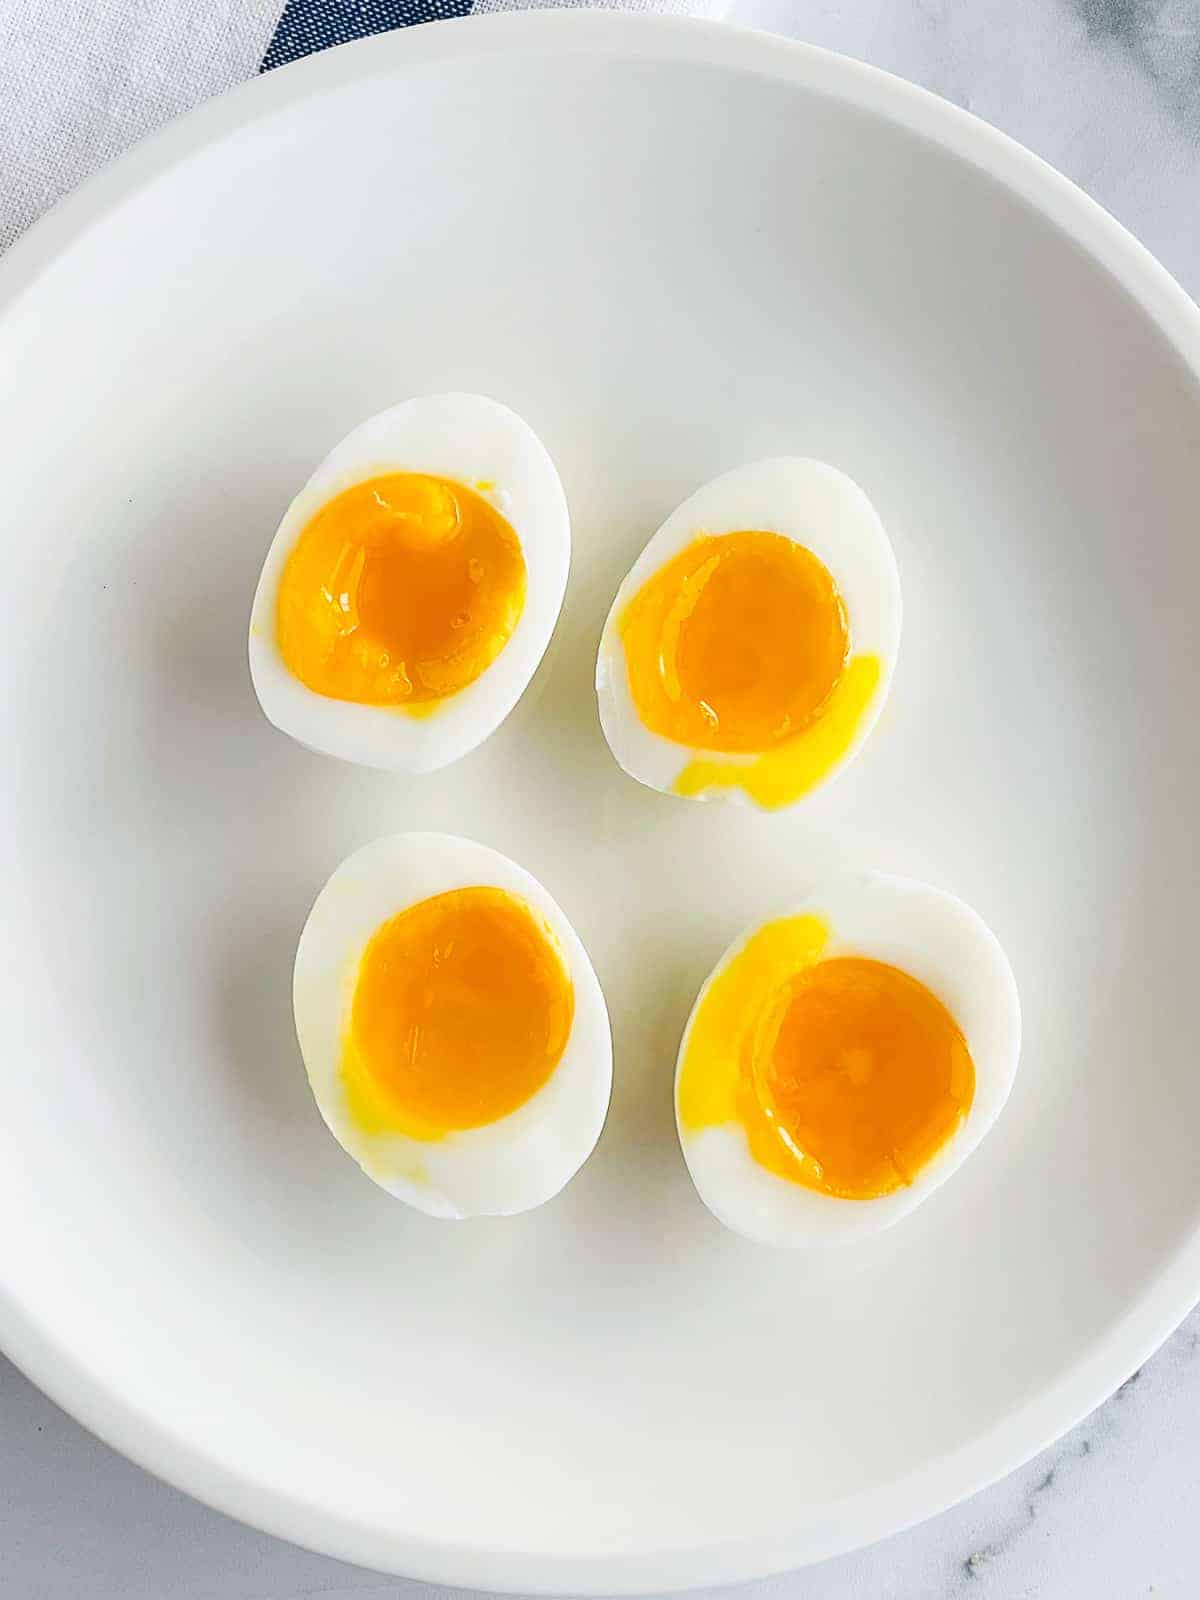 Two soft-boiled eggs, cut in half, on a white plate. Yolks are runny and soft.